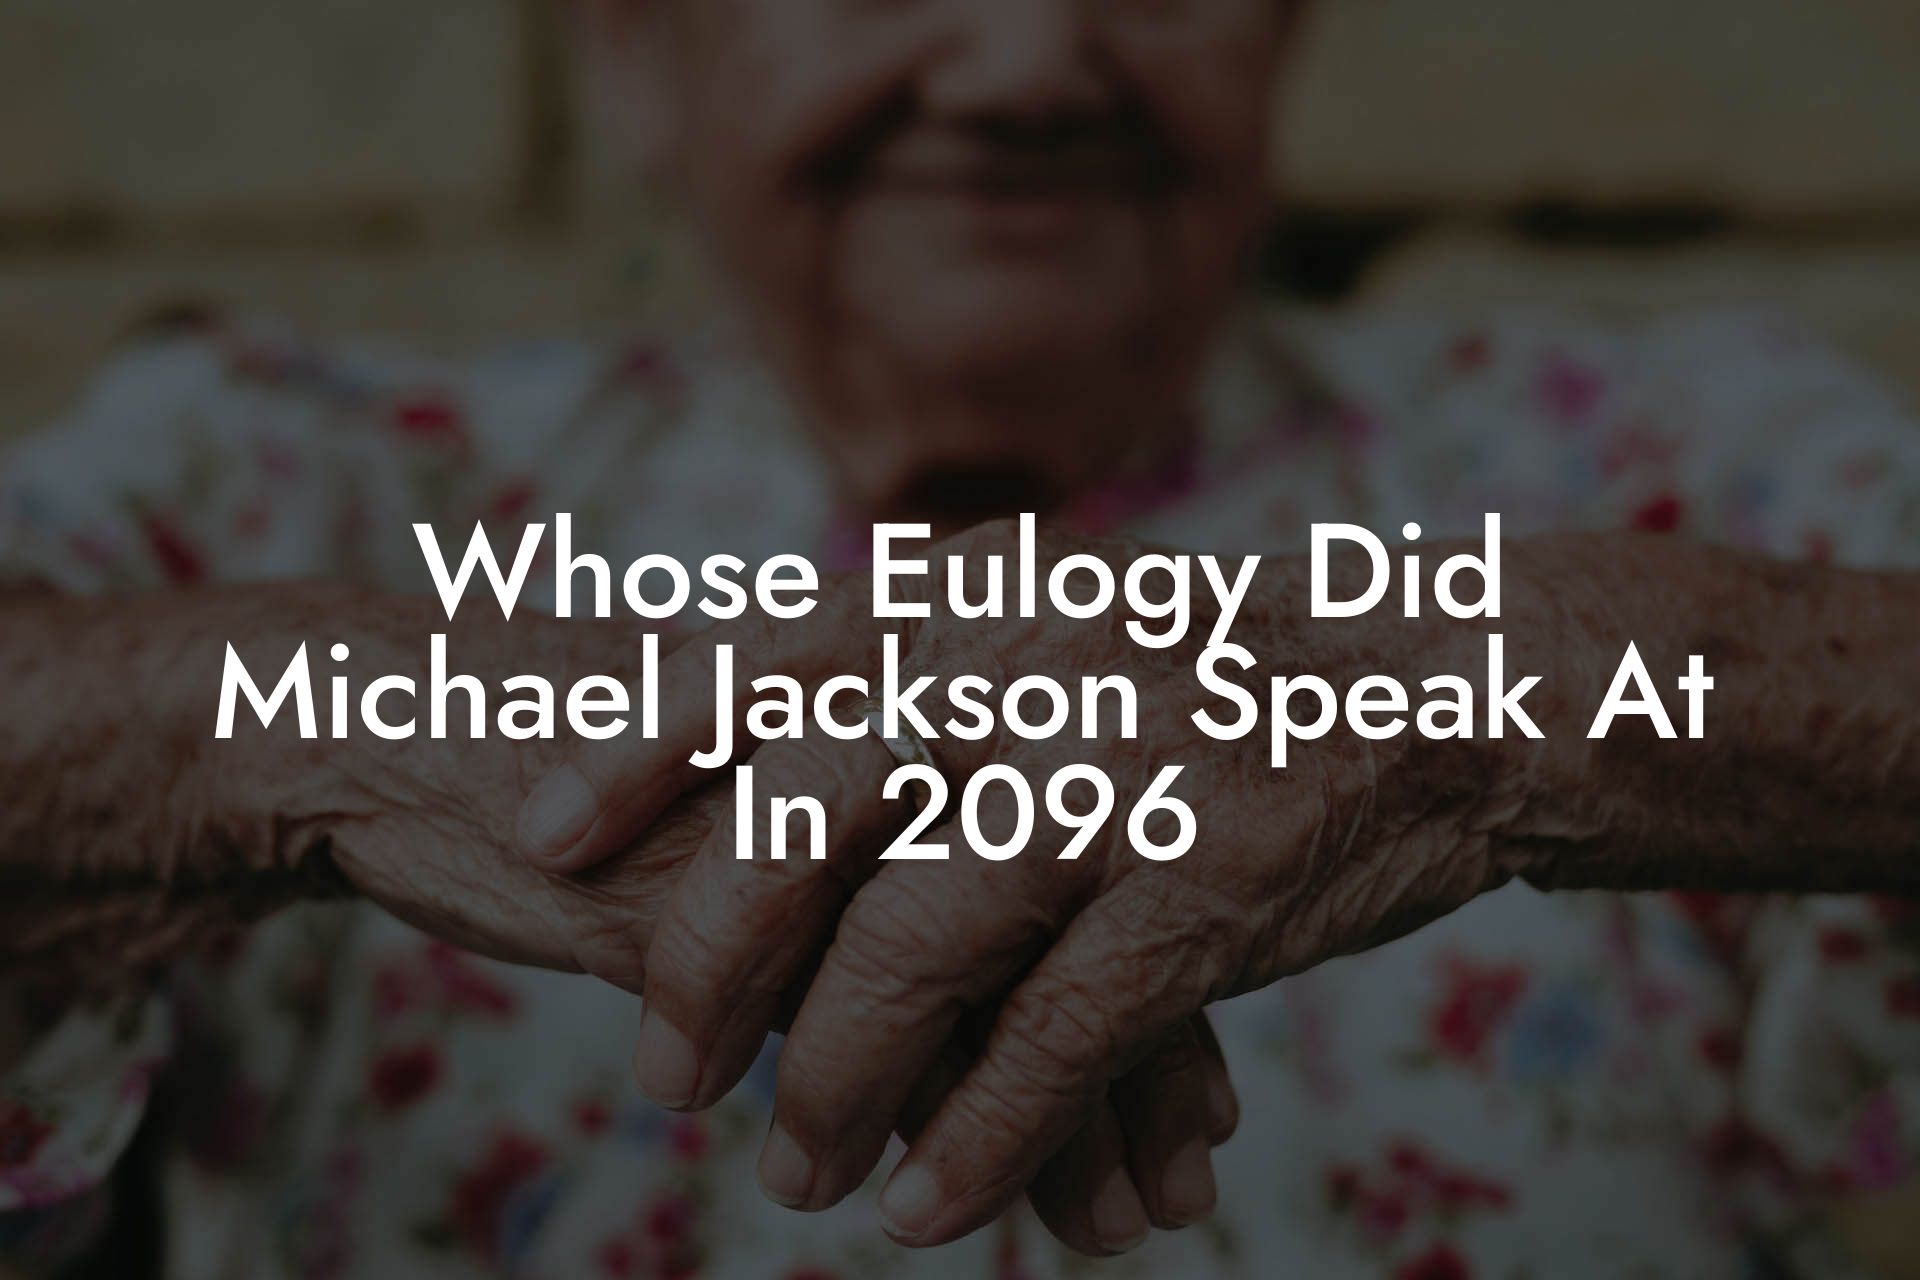 Whose Eulogy Did Michael Jackson Speak At In 2096